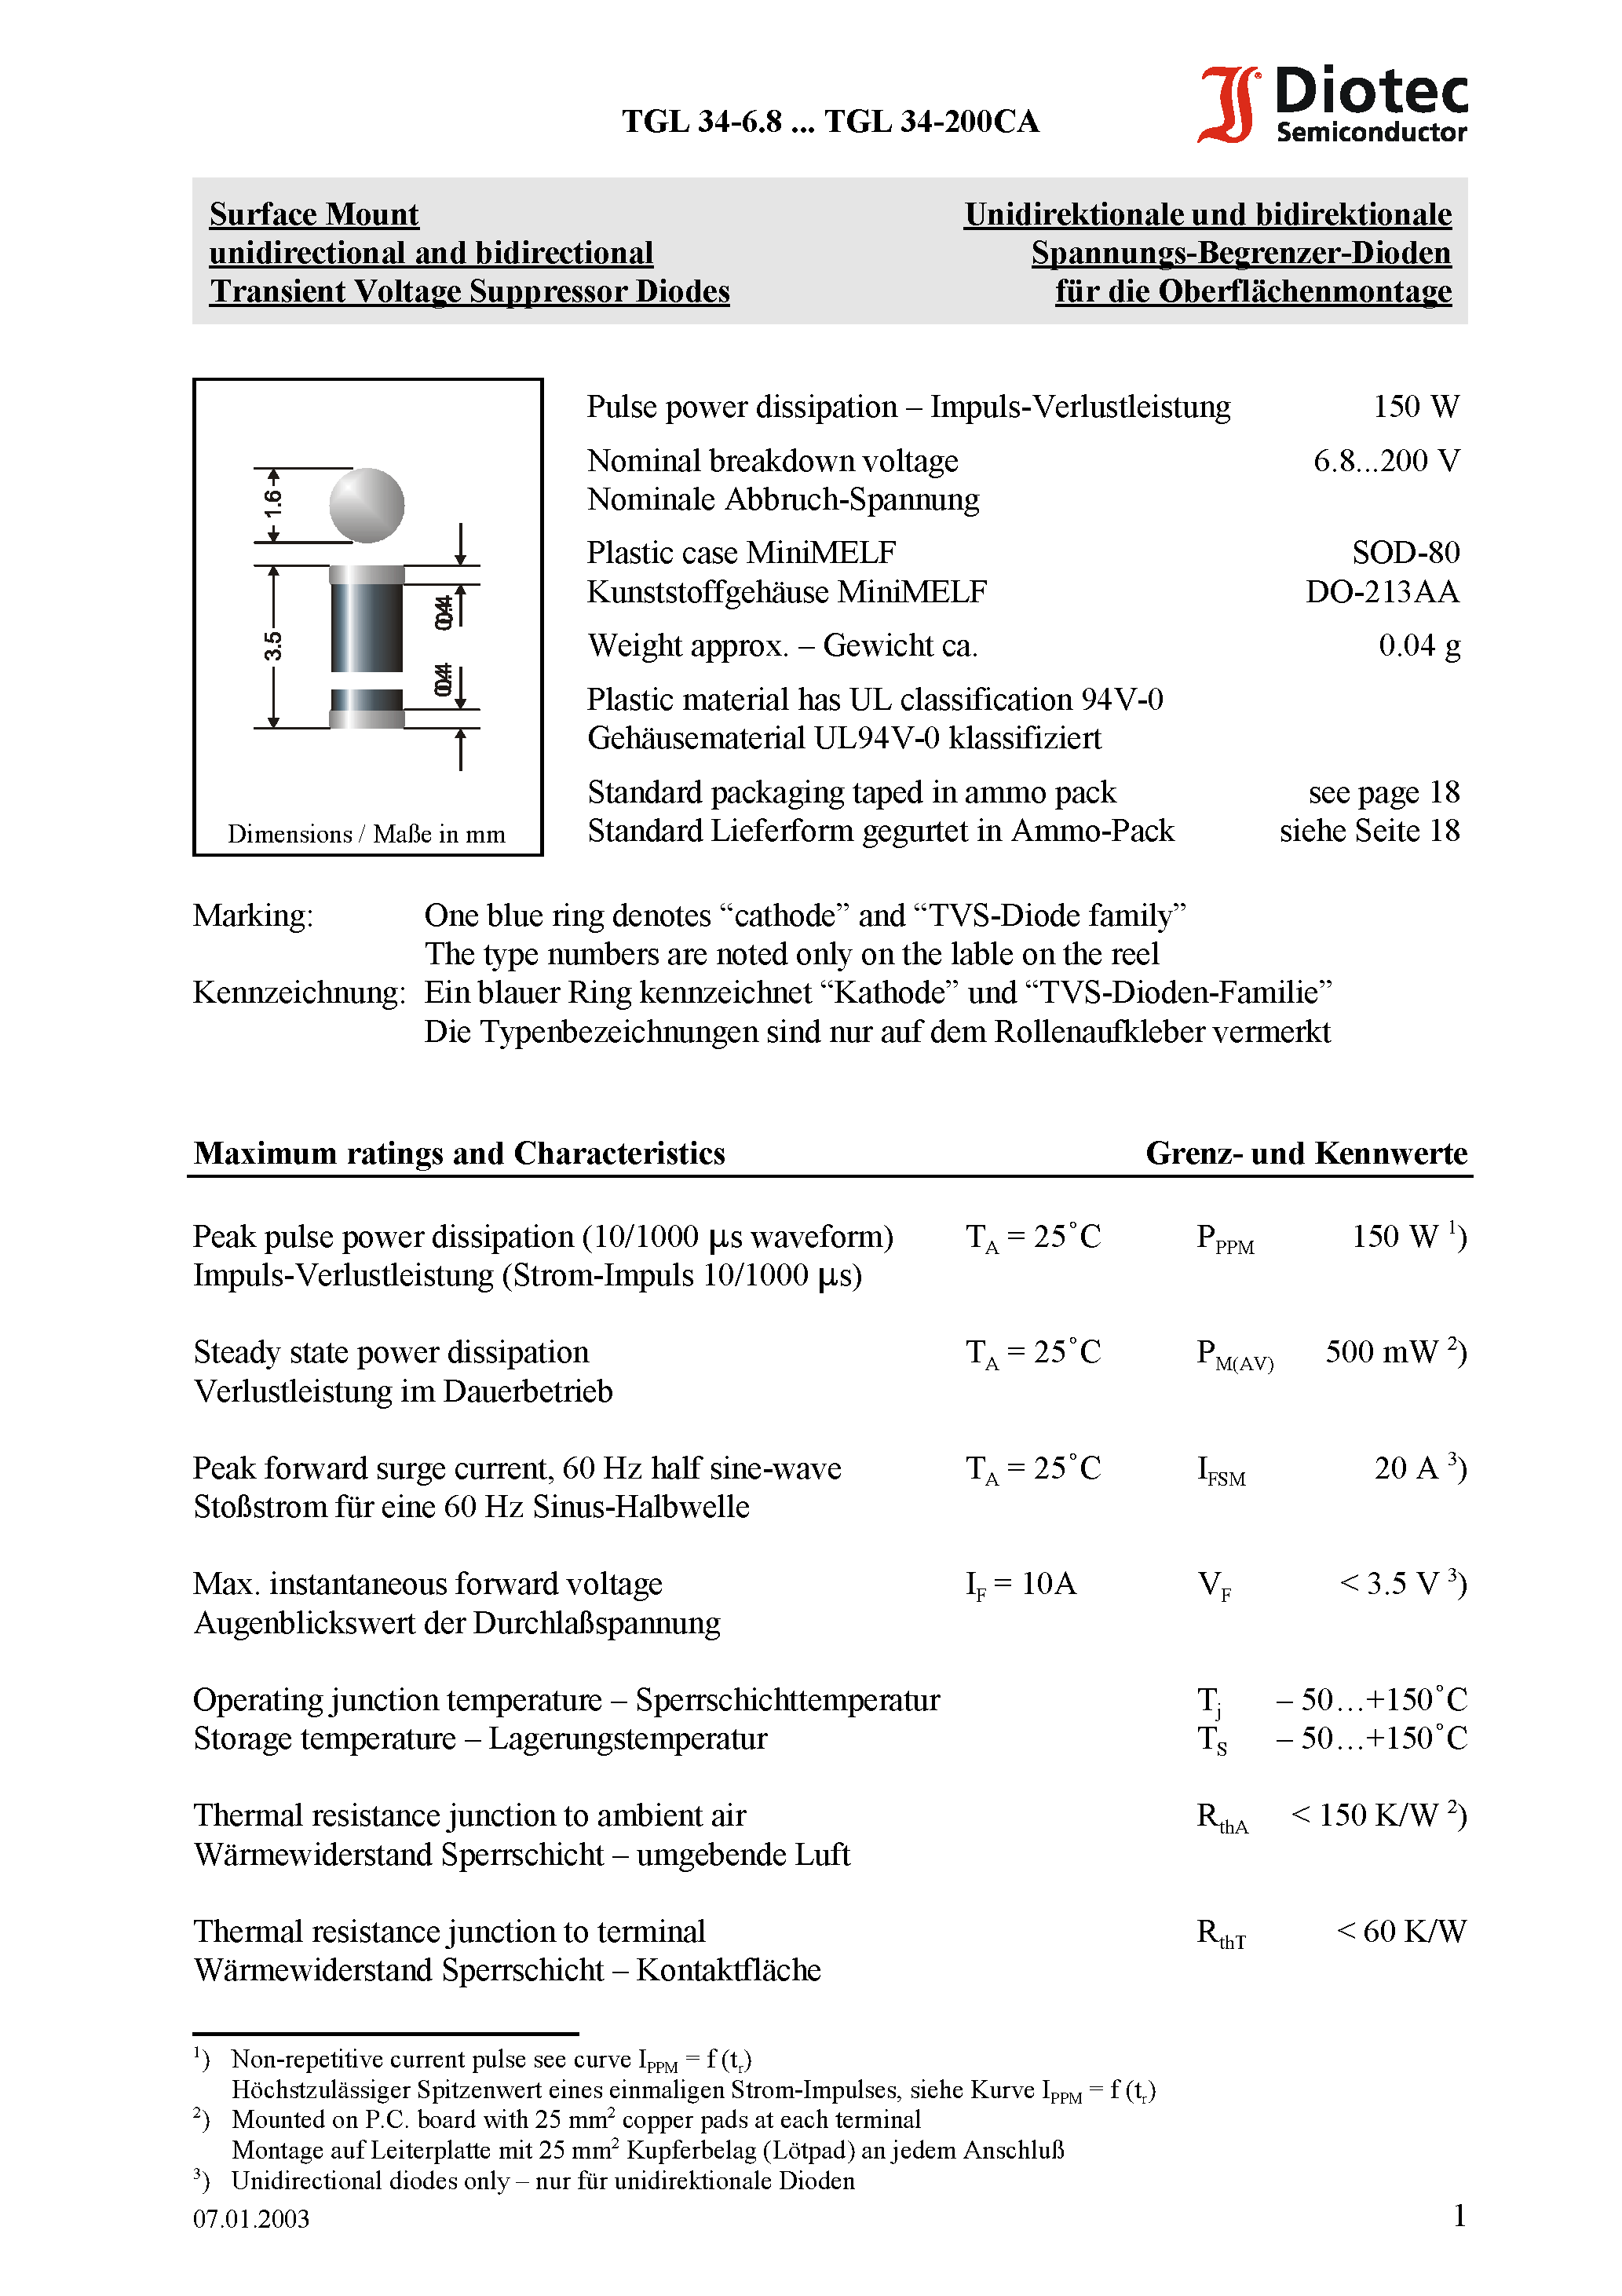 Datasheet TGL34-6.8 - Surface Mount unidirectional and bidirectional Transient Voltage Suppressor Diodes page 1